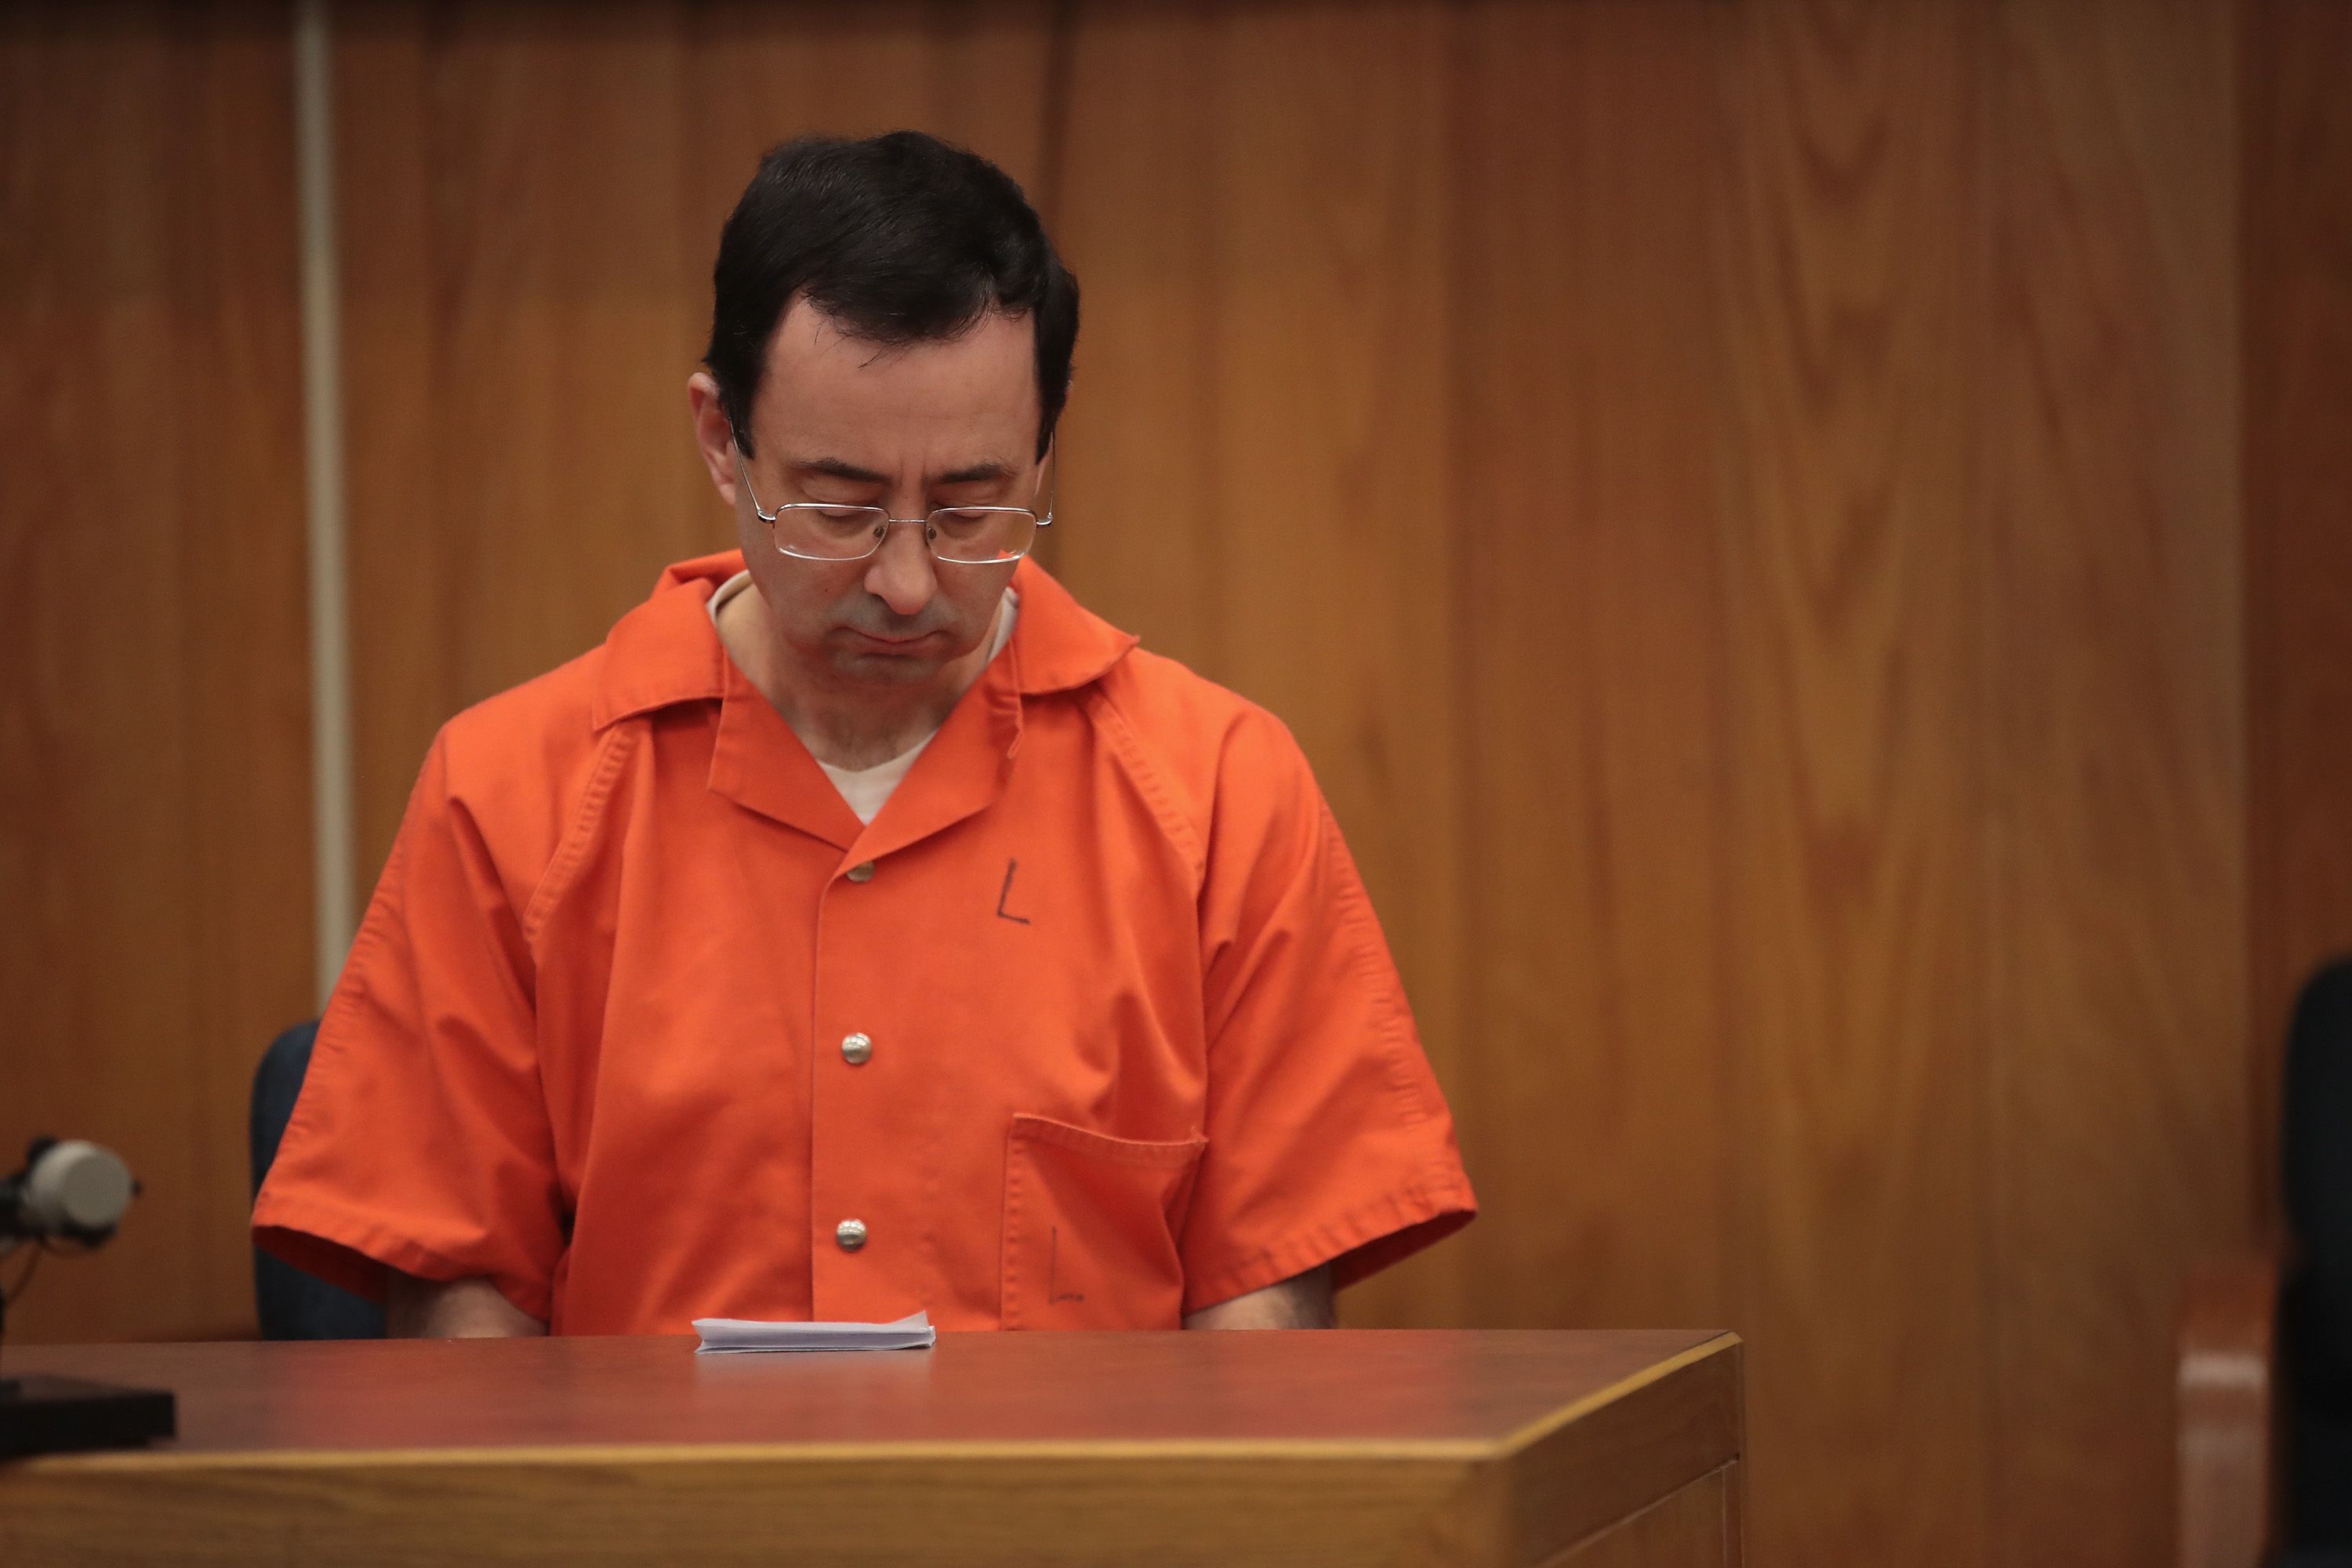 charlotte, mi february 05 larry nassar sits in court listening to statements before being sentenced by judge janice cunningham for three counts of criminal sexual assault in eaton county circuit court on february 5, 2018 in charlotte, michigan nassar has been accused of sexually assaulting more than 150 girls and young women while he was a physician for usa gymnastics and michigan state university cunningham sentenced nassar to 40 to 125 years in prison he is currently serving a 60 year sentence in federal prison for possession of child pornography last month a judge in ingham county, michigan sentenced nassar to an 40 to 175 years in prison after he plead guilty to sexually assaulting seven girls photo by scott olsongetty images